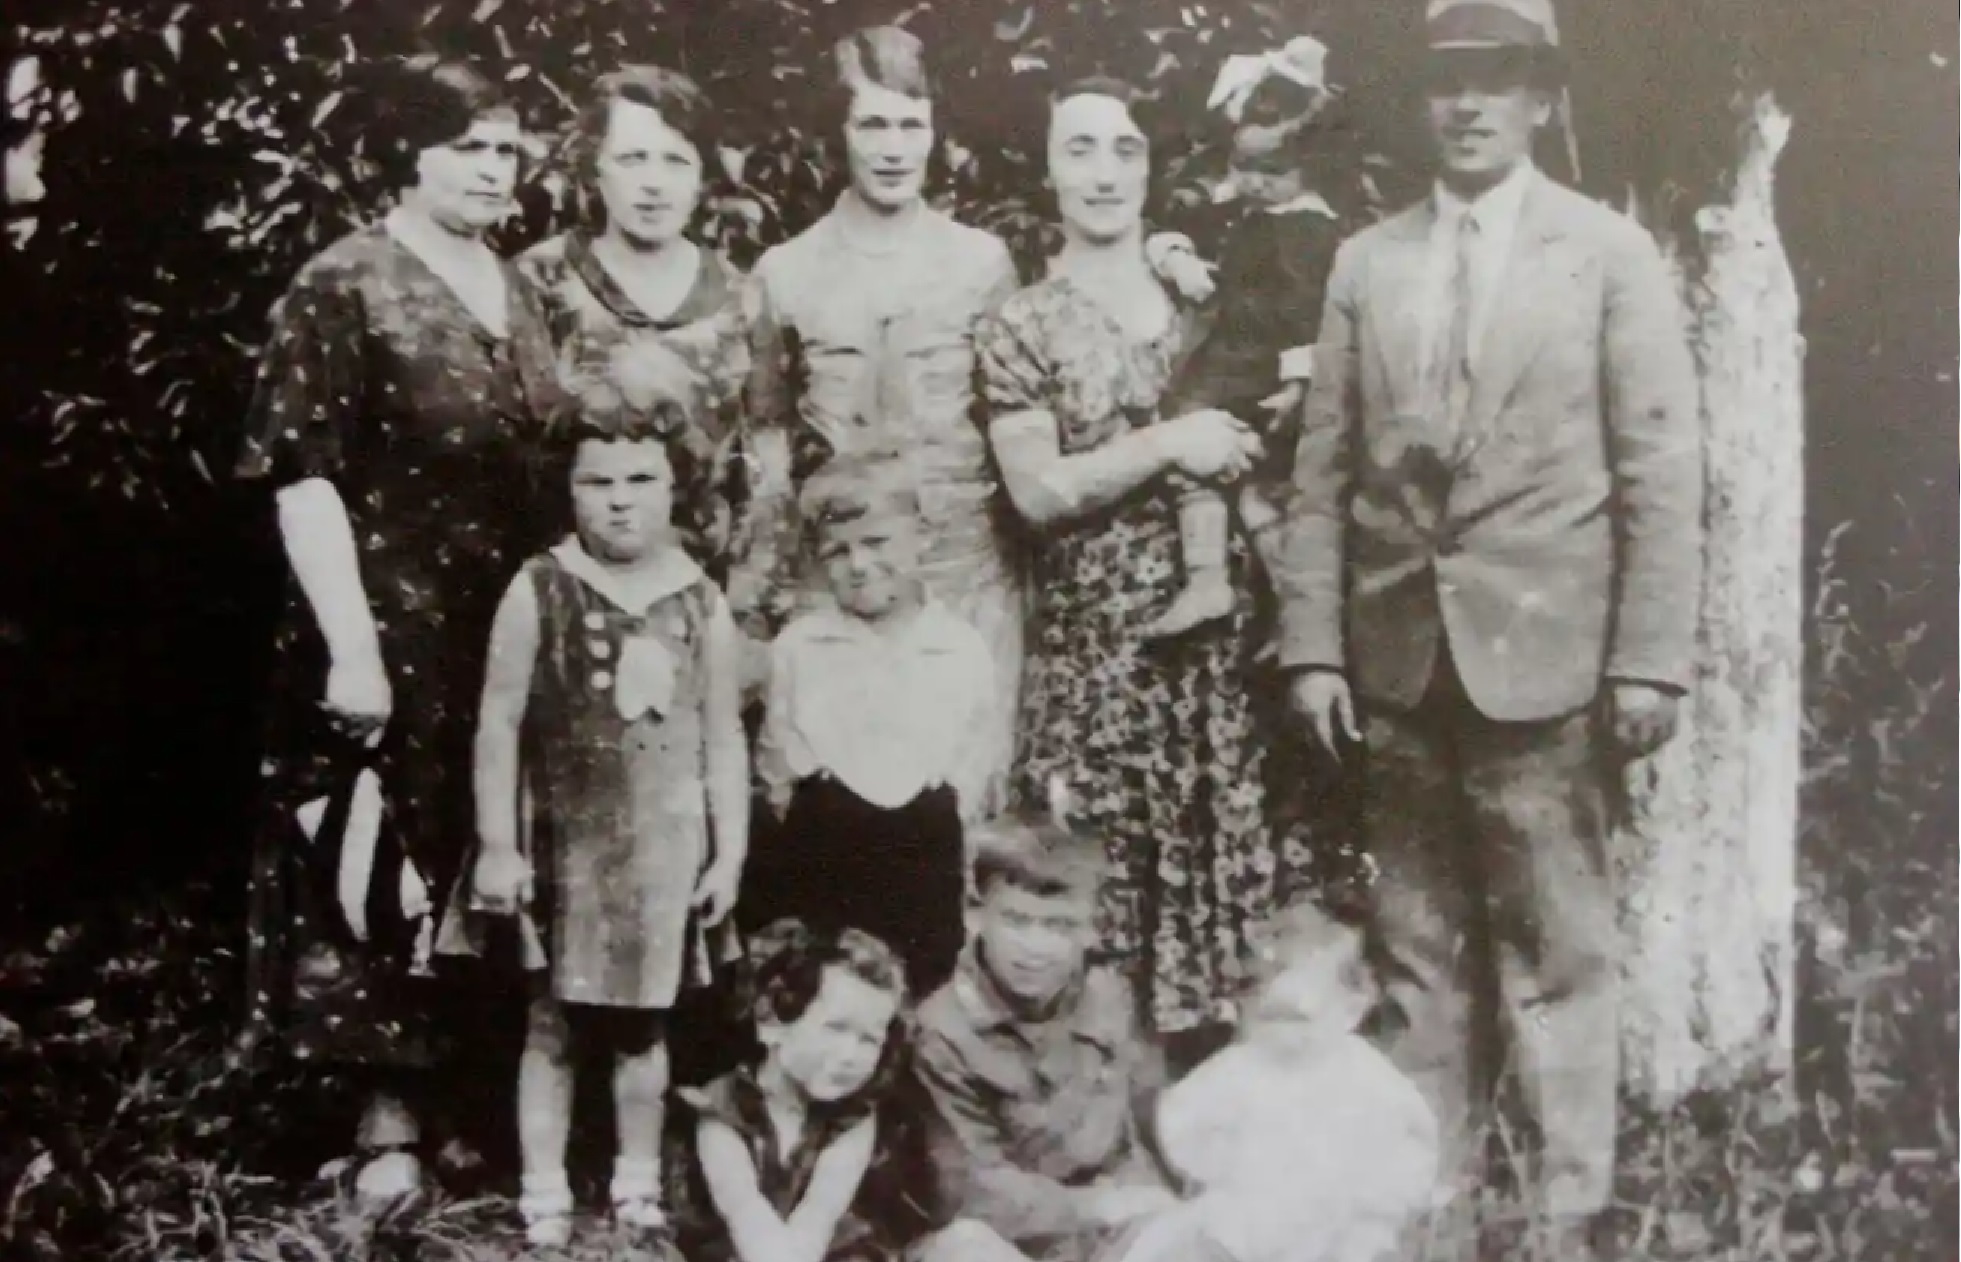 Happier times before the Holocaust: the Helfgott family in 1934 when Mala was a toddler